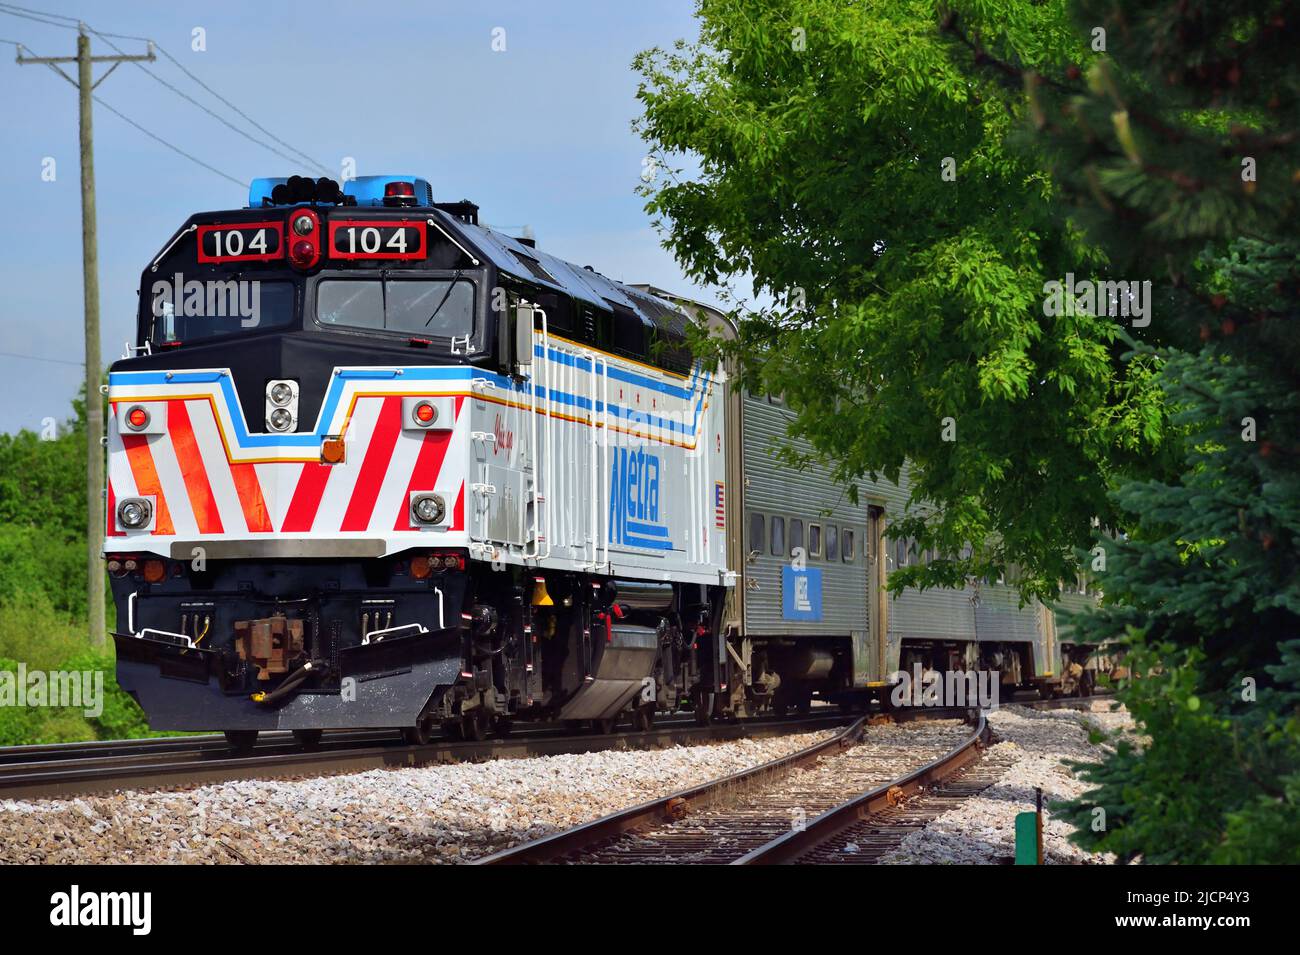 Bartlett, Illinois, USA. A Metra commuter train passing through suburbs on its journey to Chicago. Stock Photo